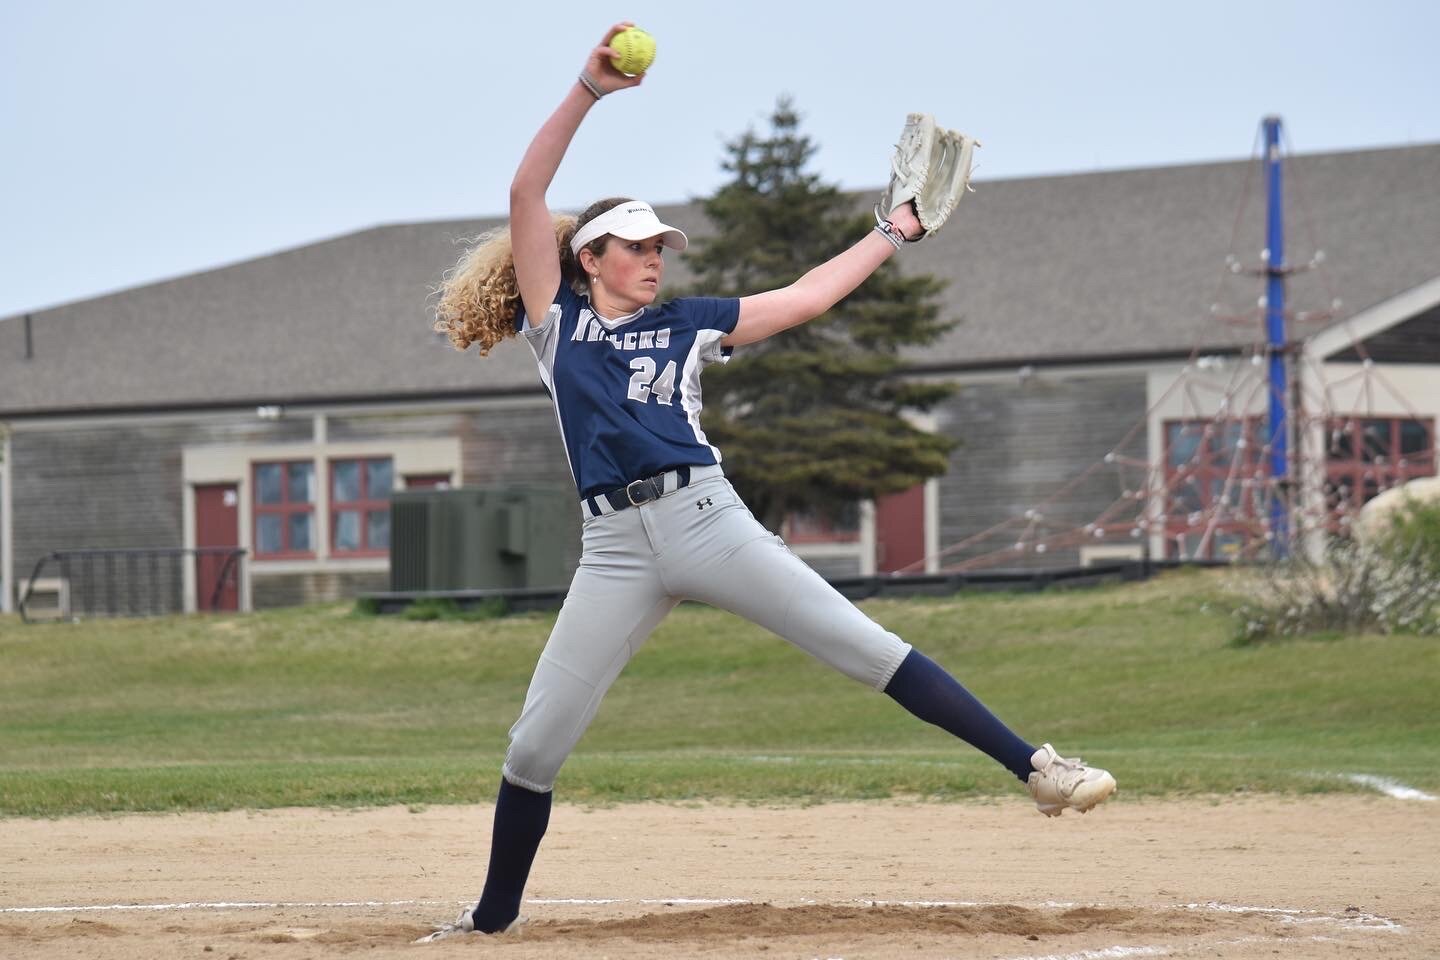 Seren Cristler started on the mound for the Whalers on Friday against Sturgis.